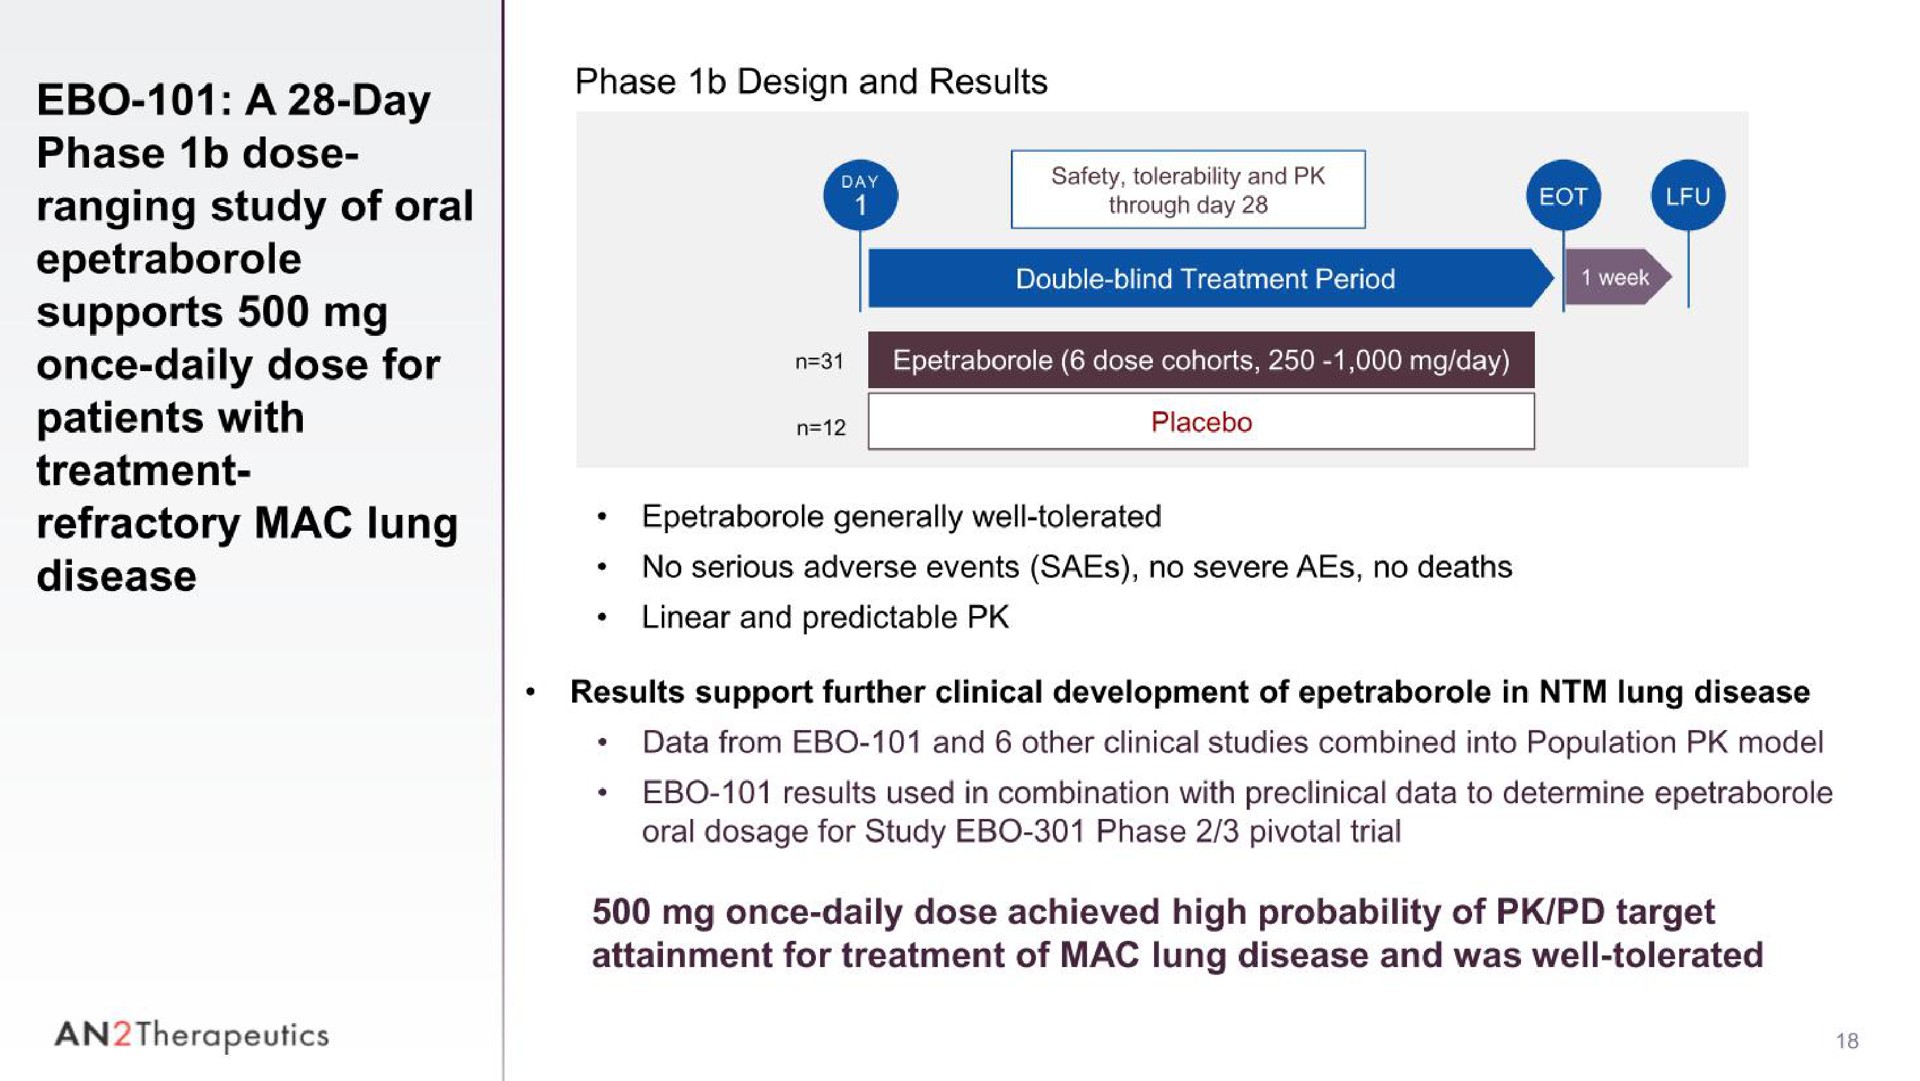 a day phase dose ranging study of oral supports once daily dose for patients with treatment refractory mac lung disease phase design and results mere male placebo generally well tolerated no serious adverse events no severe aes no deaths linear and predictable results support further clinical development of in lung disease data from and other clinical studies combined into population model results used in combination with preclinical data to determine oral dosage for study phase pivotal trial once daily dose achieved high probability of target attainment for treatment of mac lung disease and was well tolerated an therapeutics | AN2 Therapeutics